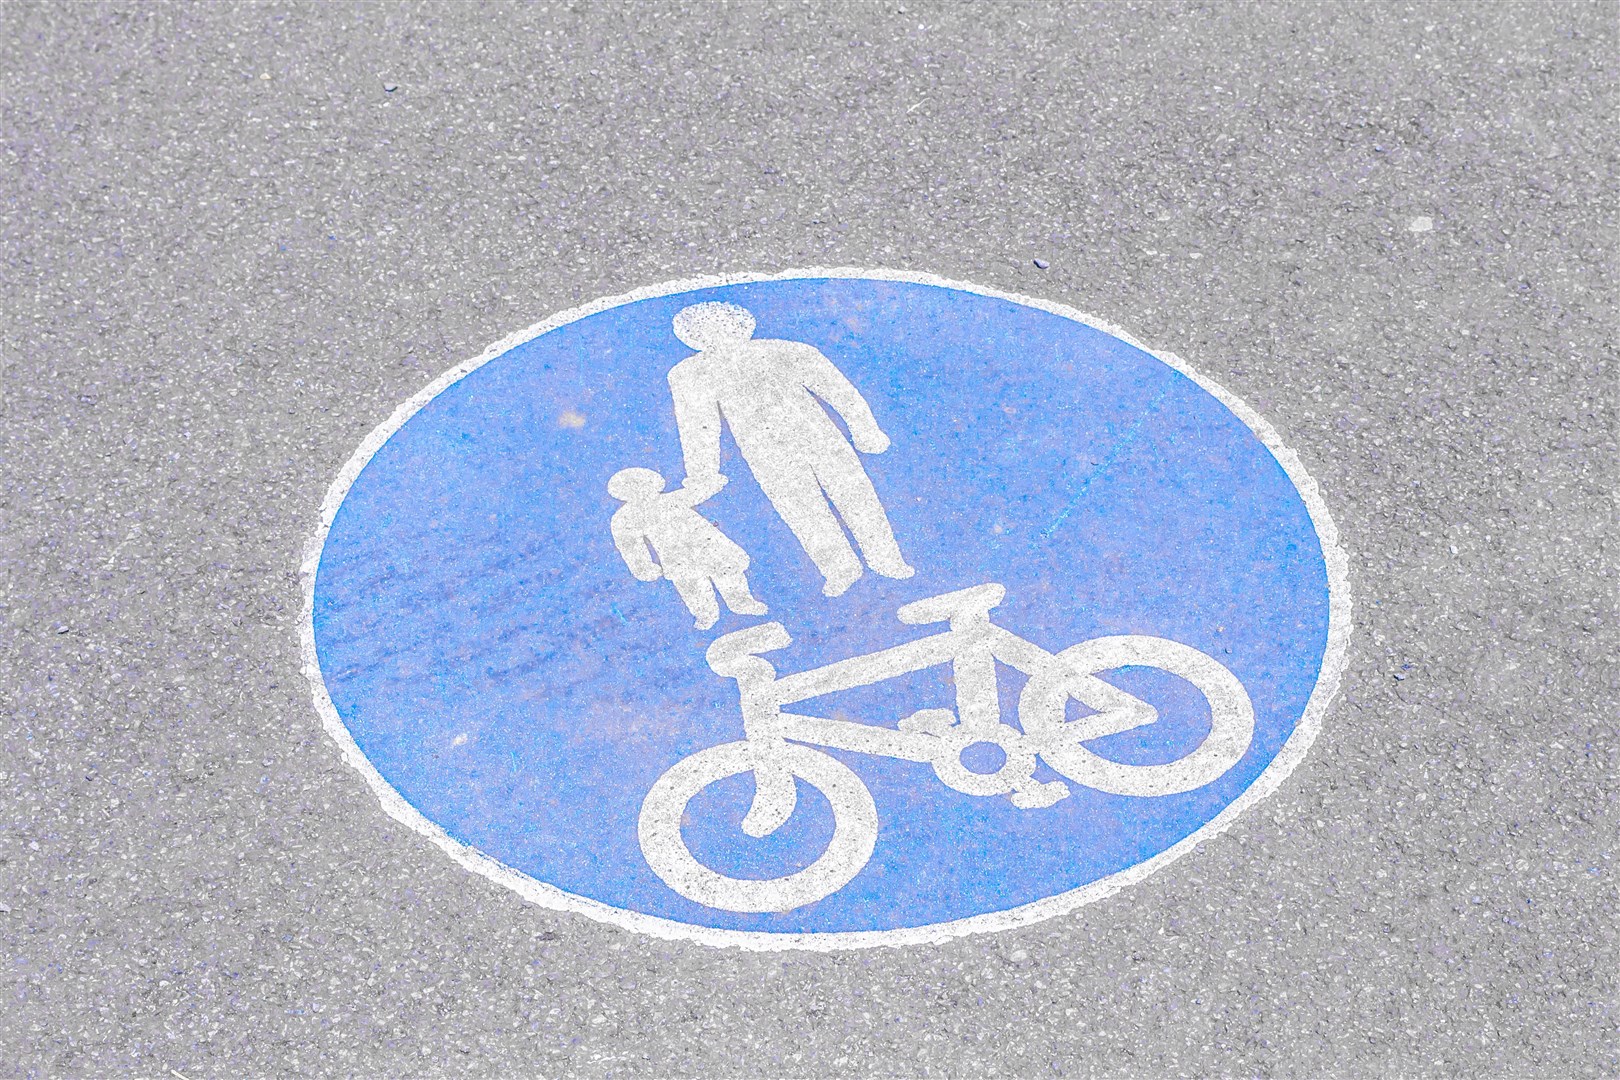 Walking and cycling are among the sustainable travel options supported by the Smarter Choices, Smarter Places Open Fund.